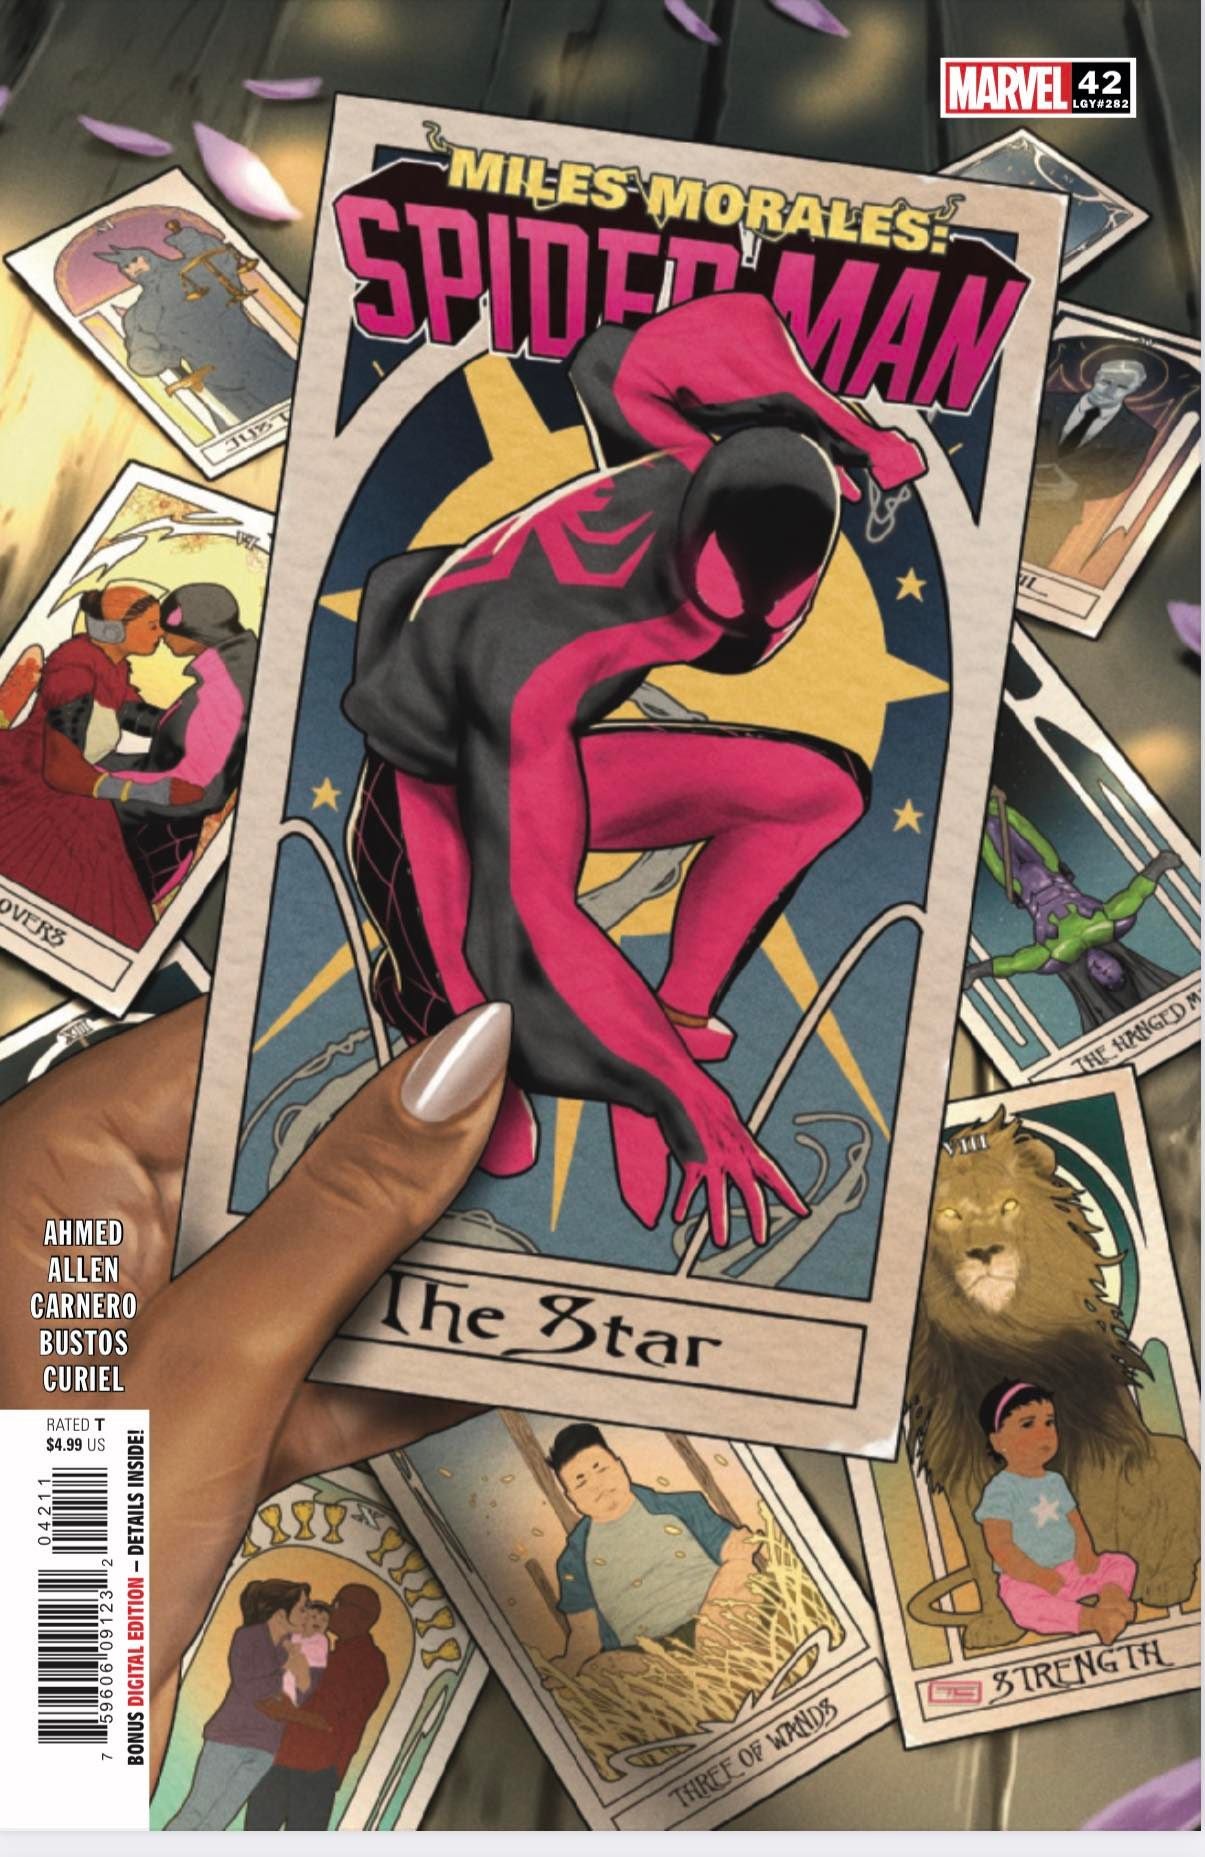 Miles Morales: Spider-Man #42 cover